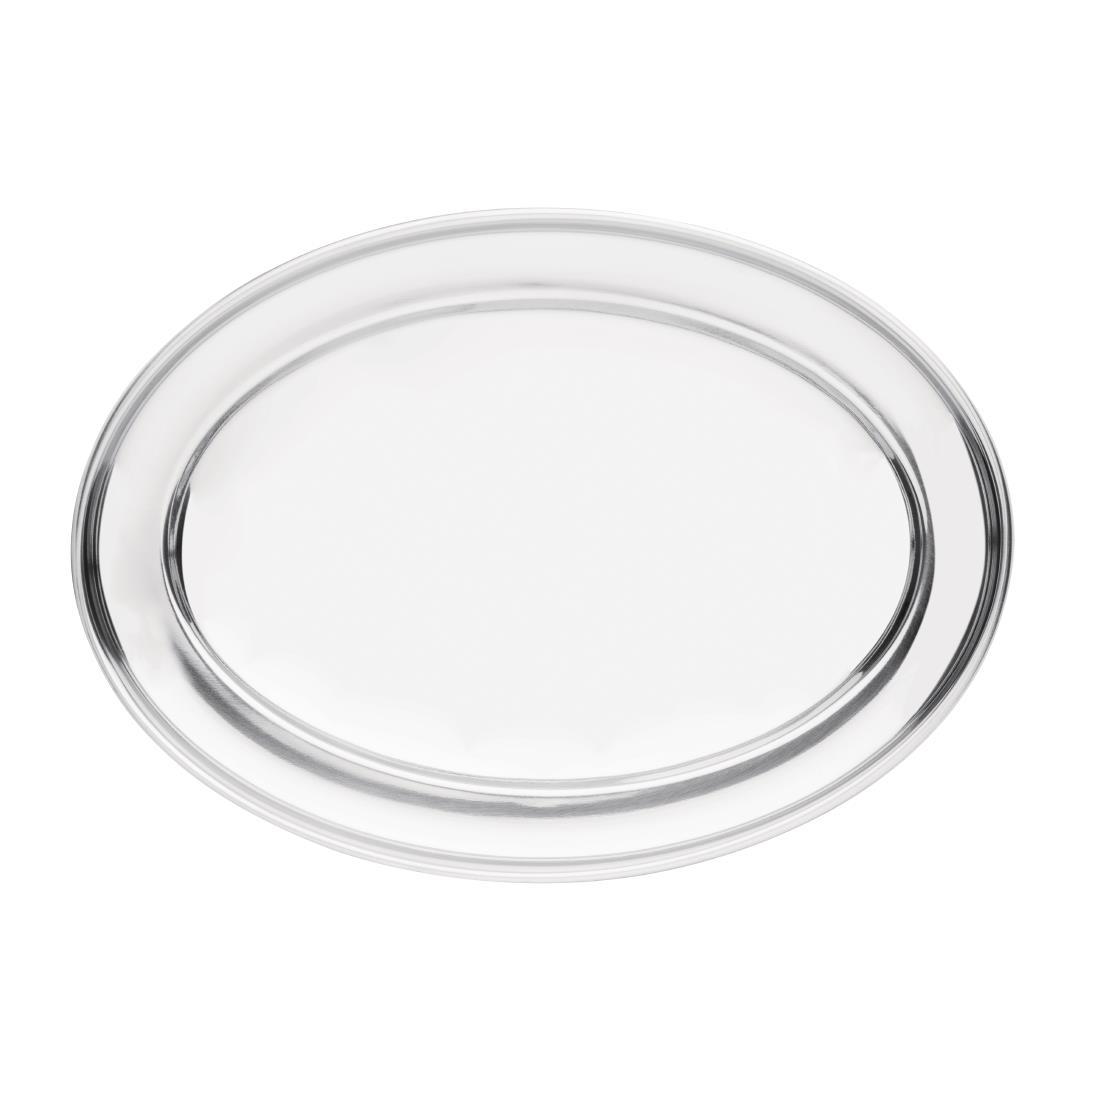 Olympia Stainless Steel Oval Serving Tray 350mm - K364  - 5